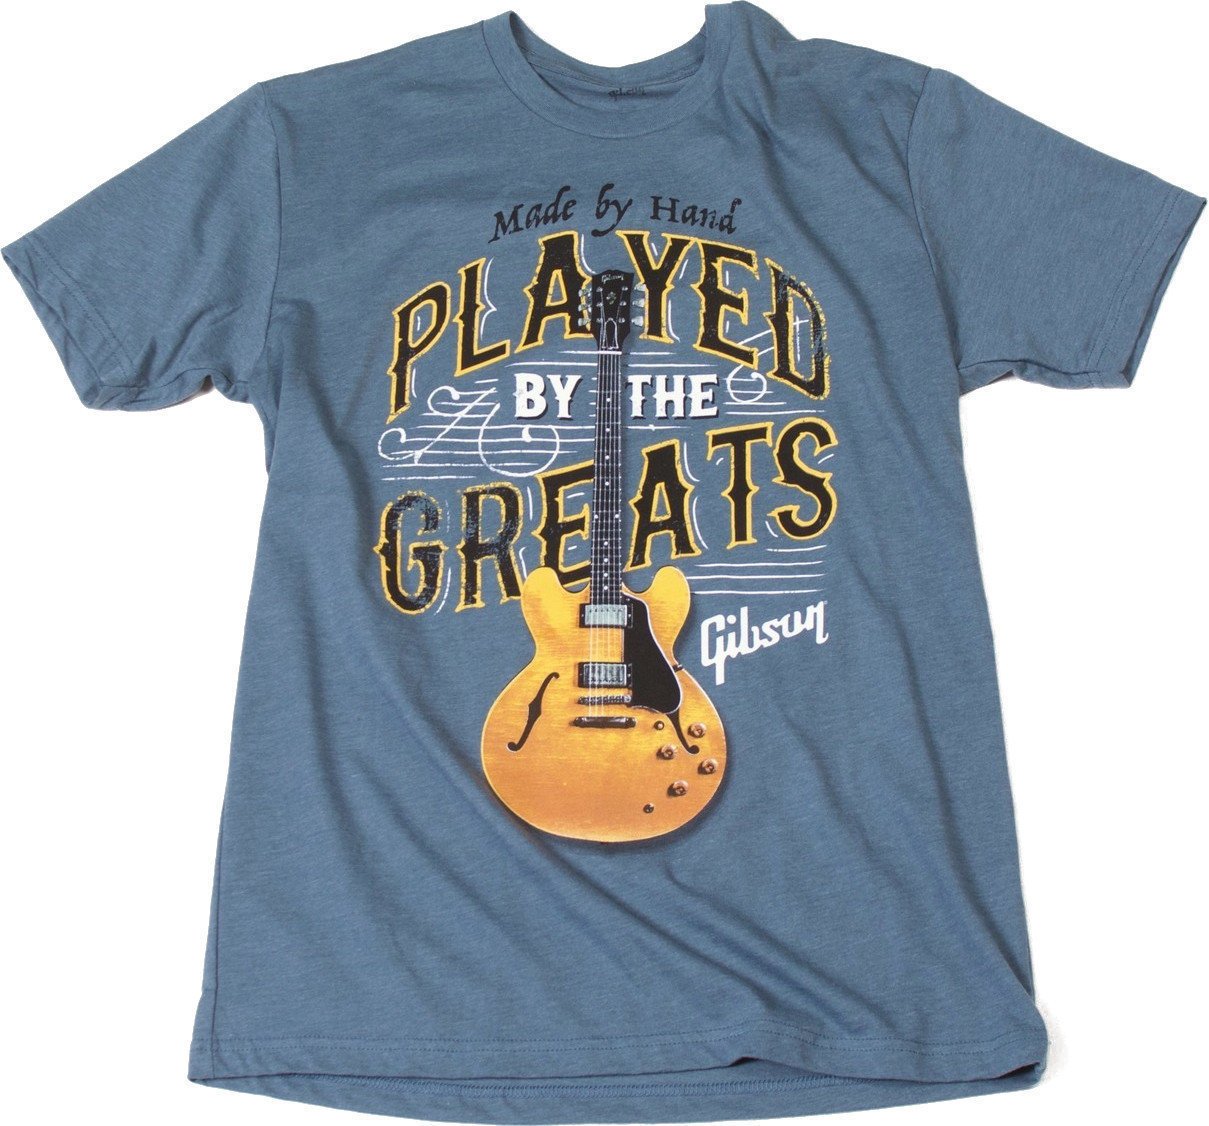 T-Shirt Gibson Played By The Greats T Indigo XL